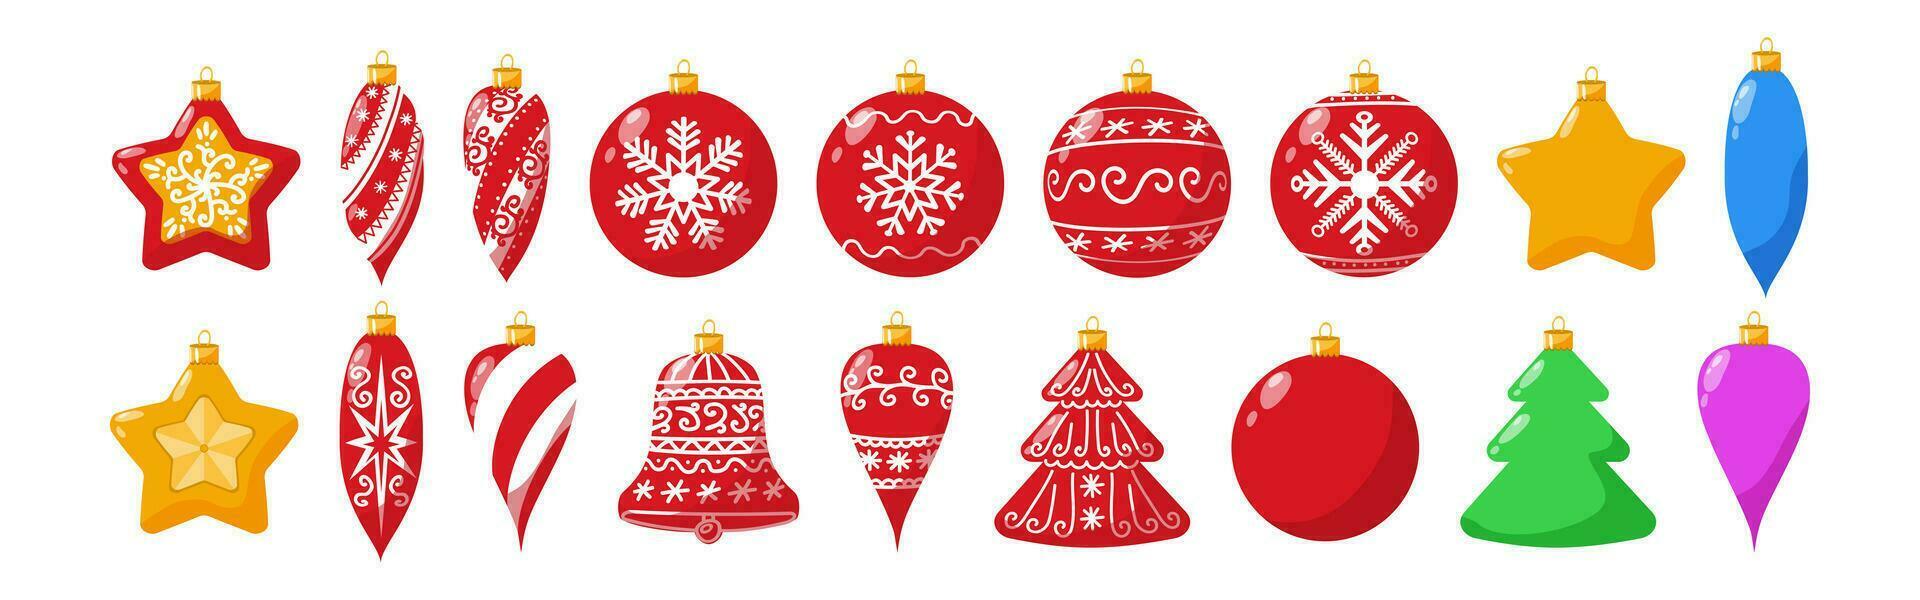 Set of different Christmas tree toys for Christmas and New Year. Christmas tree decorations with and without patterns for hanging on a thread. Vector illustration.